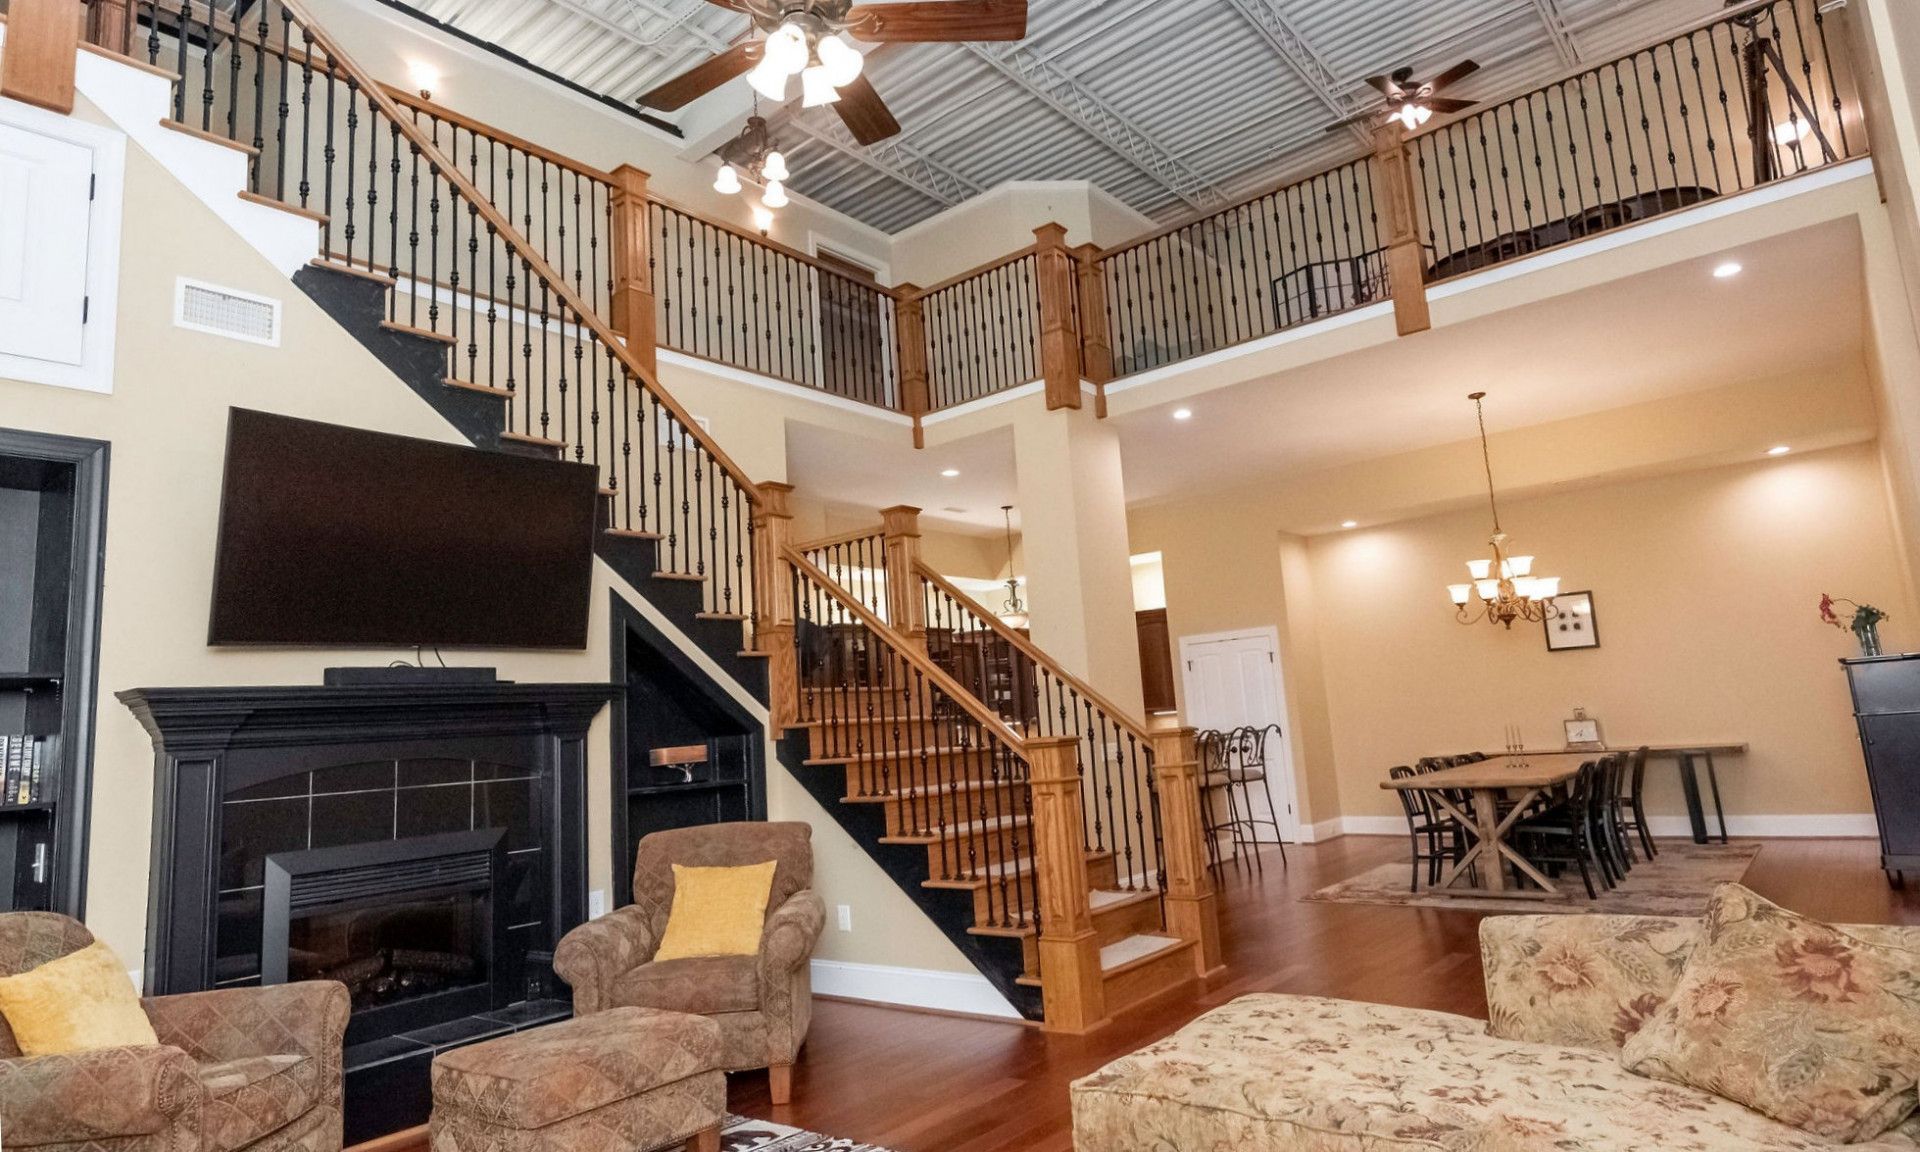 Open layout great for entertaining and being together in the NC mountains!